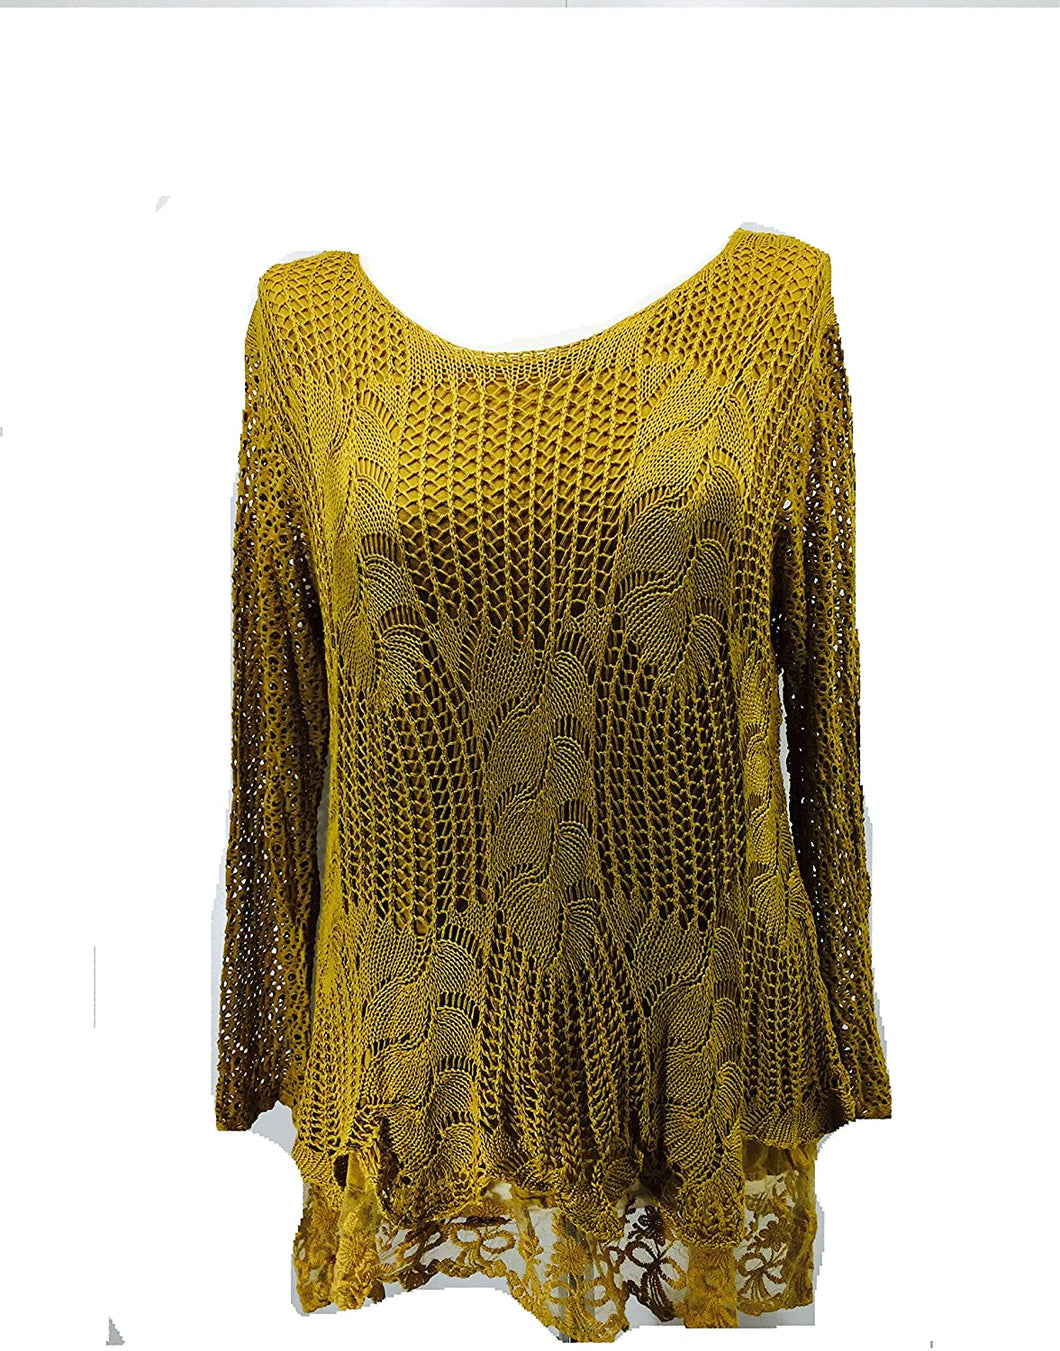 Pamper Yourself Now ltd Ladies Mustard Crochet lace Long Sleeve top. Made in Italy (AA27)